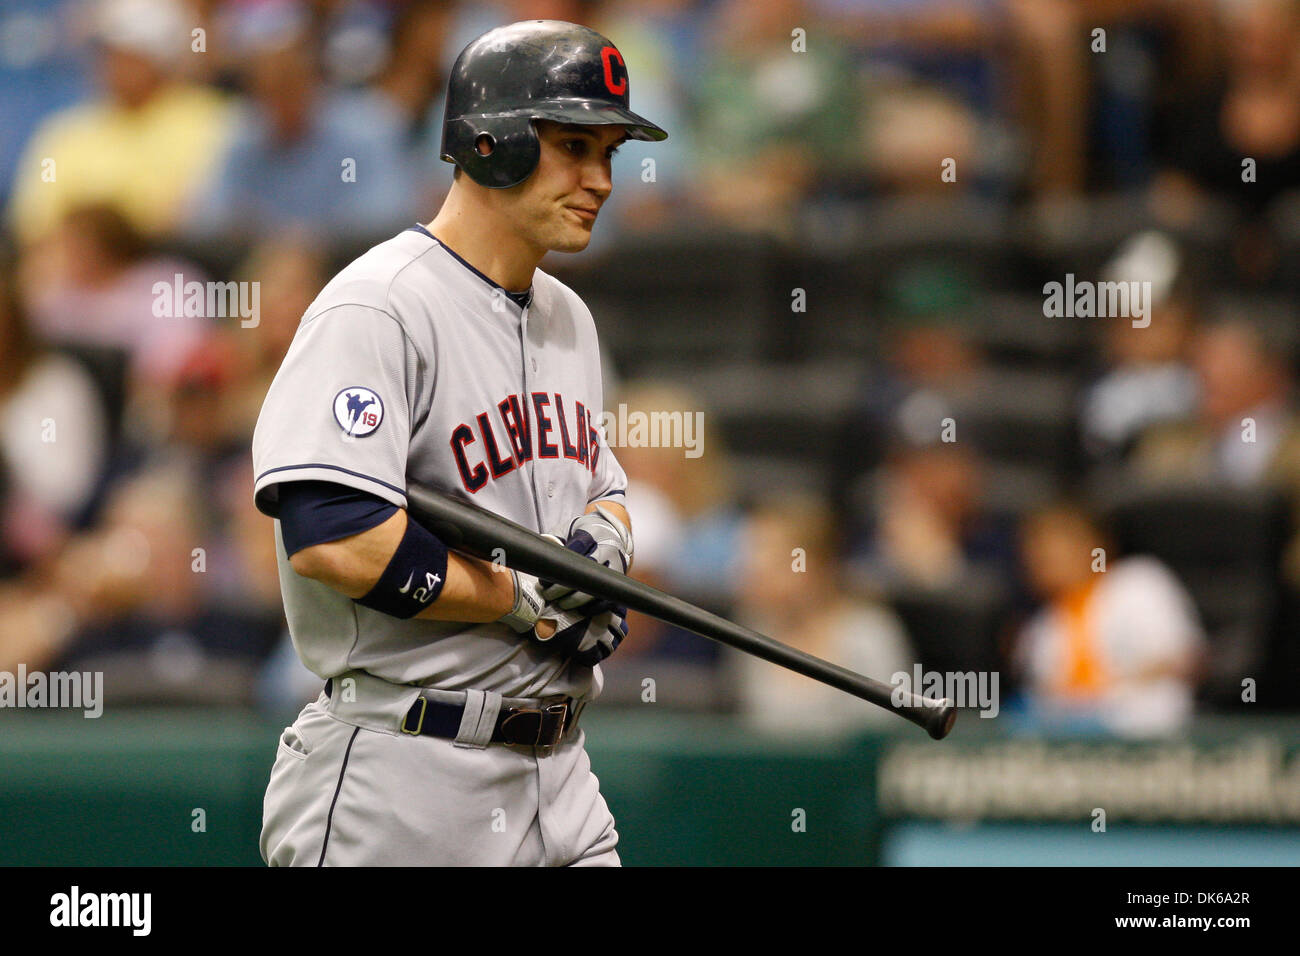 Cleveland Indians outfielder Grady Sizemore making beautiful noise at top  of the lineup: Indians Insider 